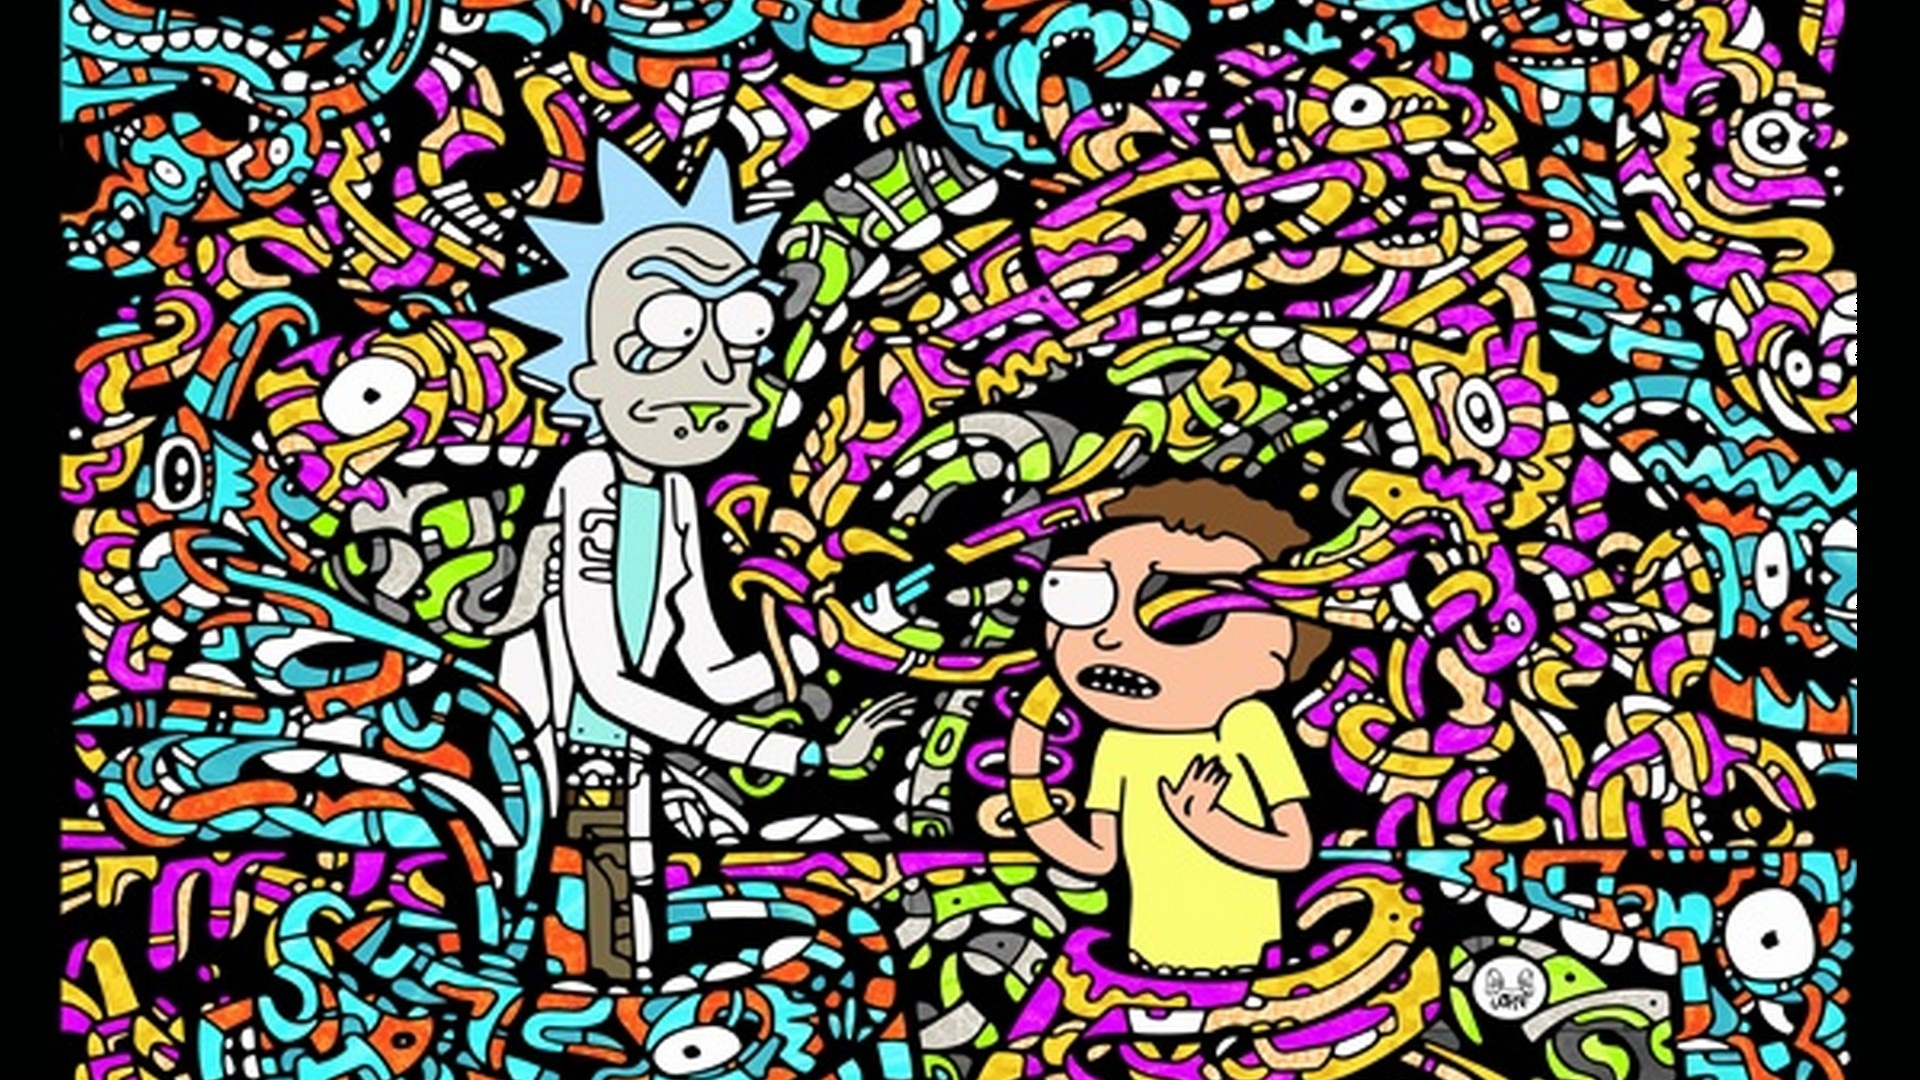 Rick and Morty Art Wallpaper with resolution 1920X1080 pixel. You can use this wallpaper as background for your desktop Computer Screensavers, Android or iPhone smartphones